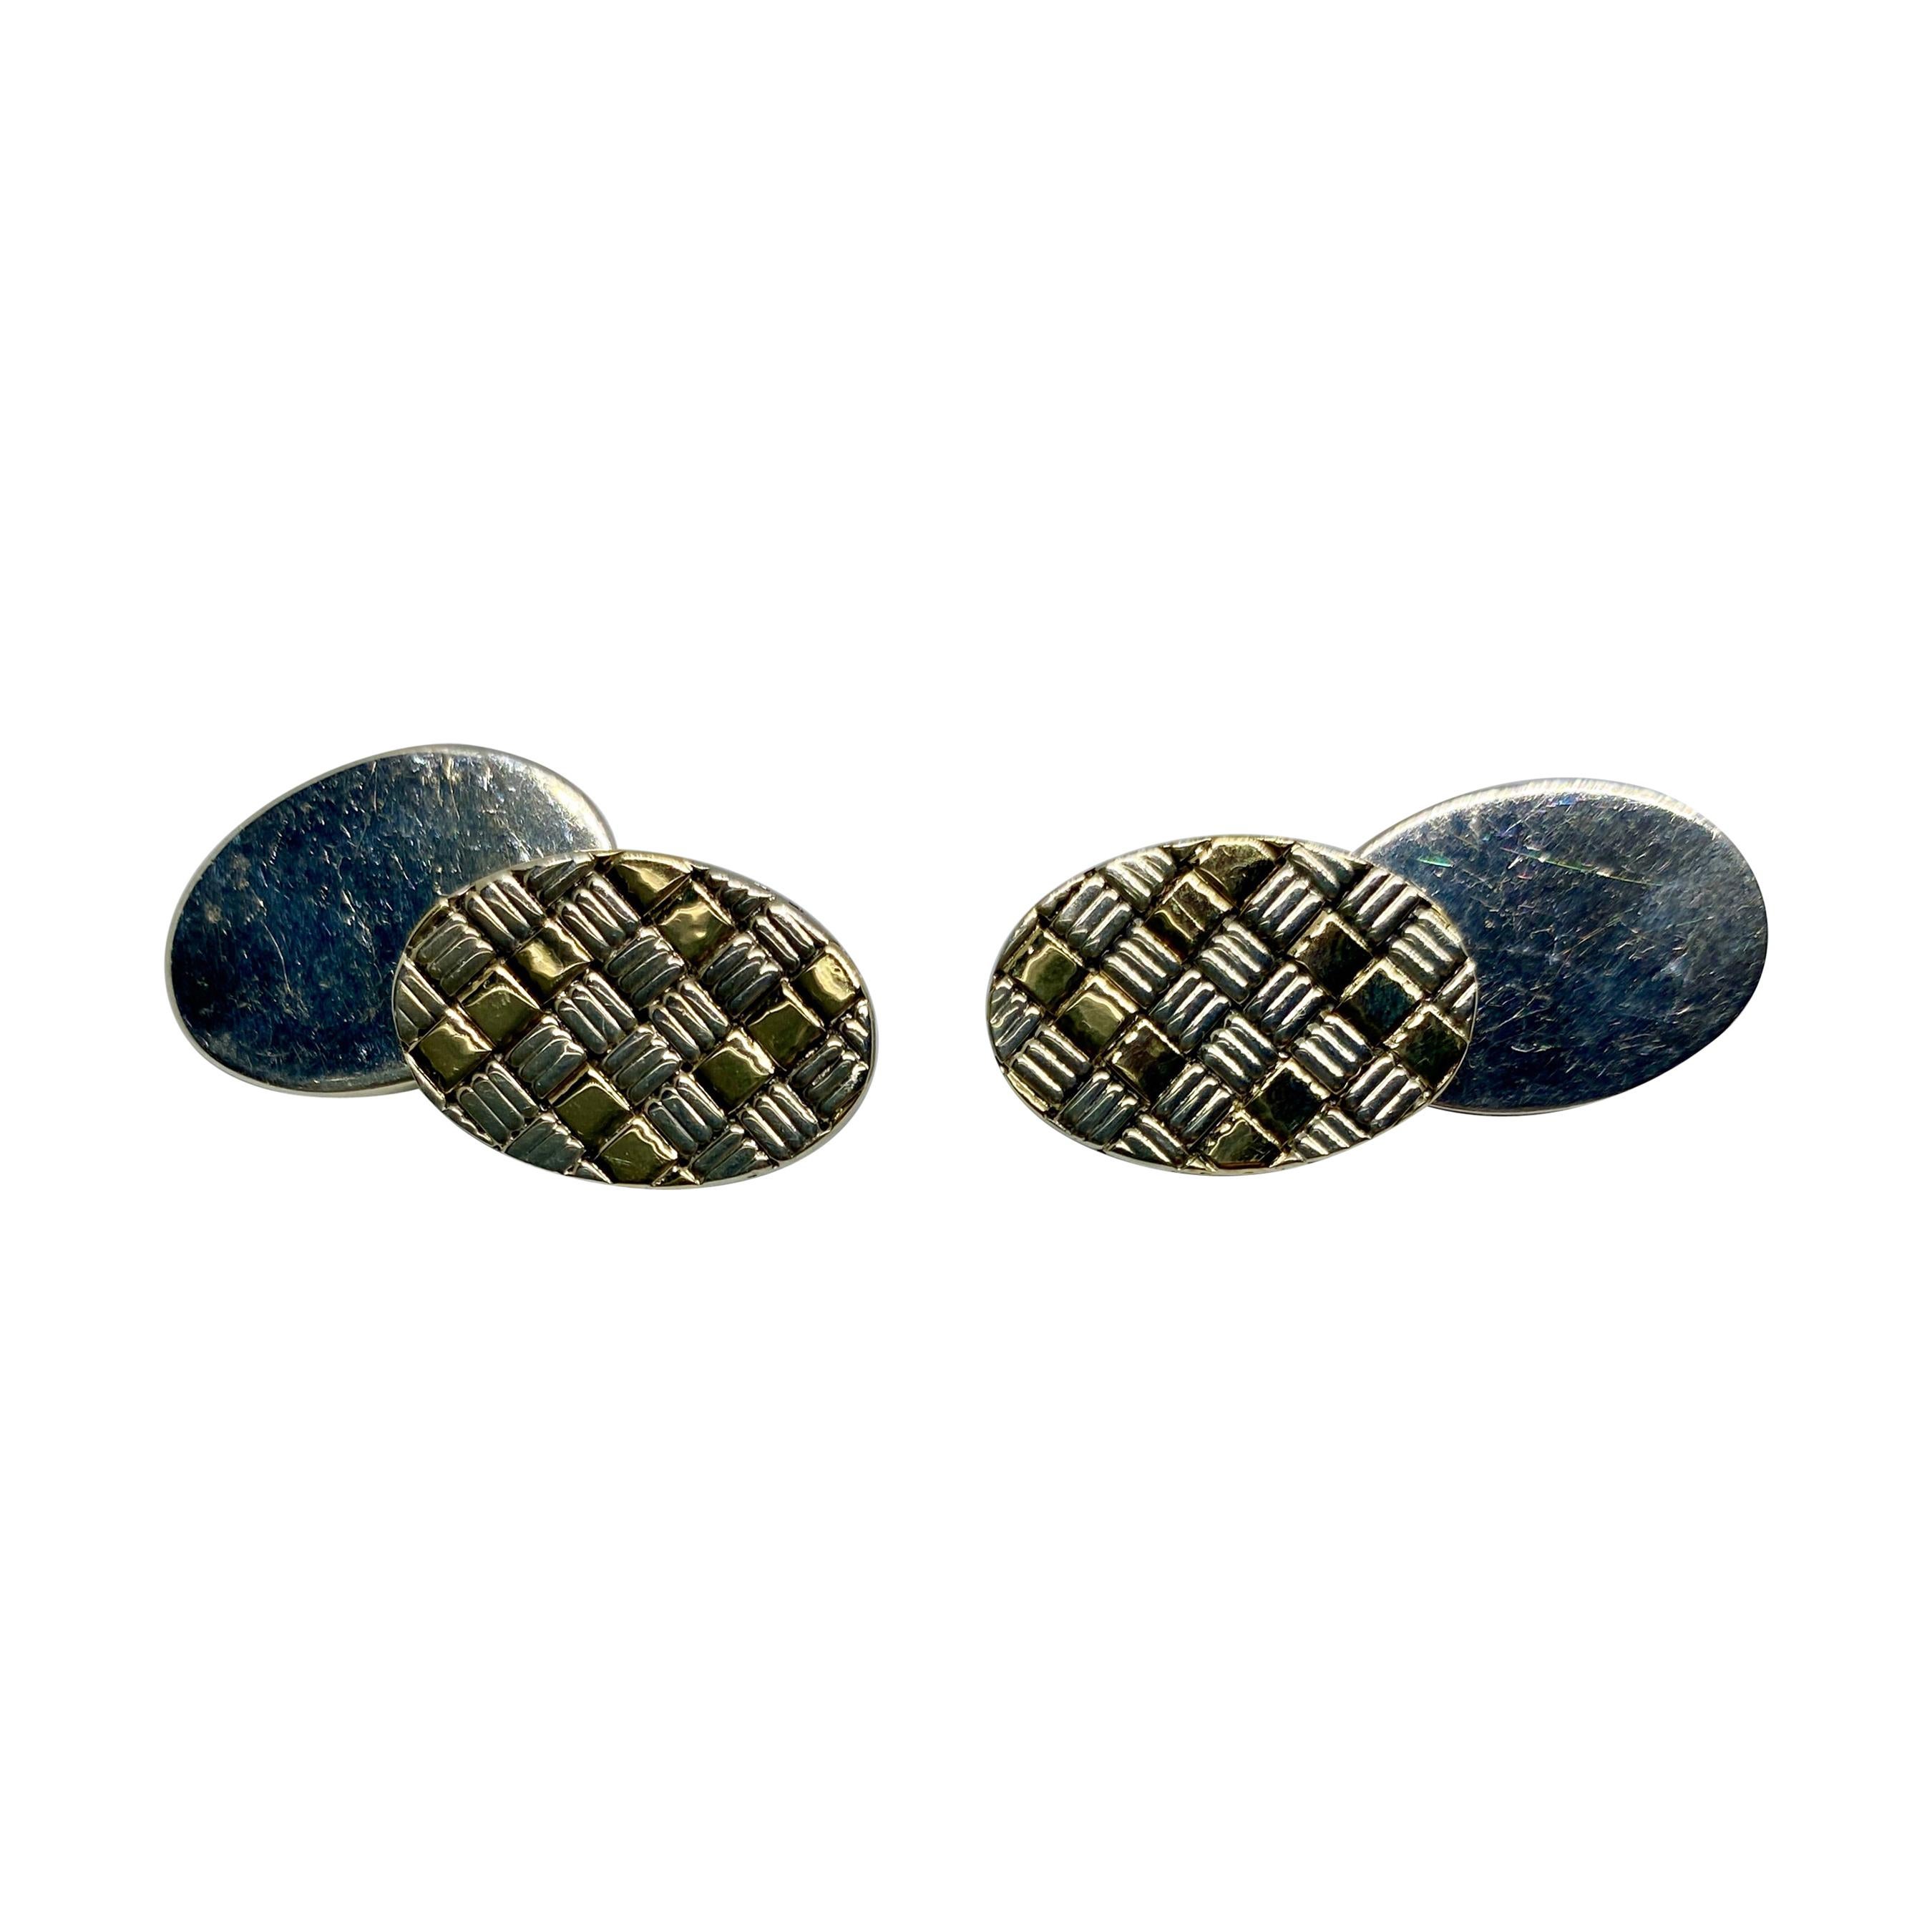 Cartier Oval Cufflinks with Checkerboard Design in 18k Gold and Sterling